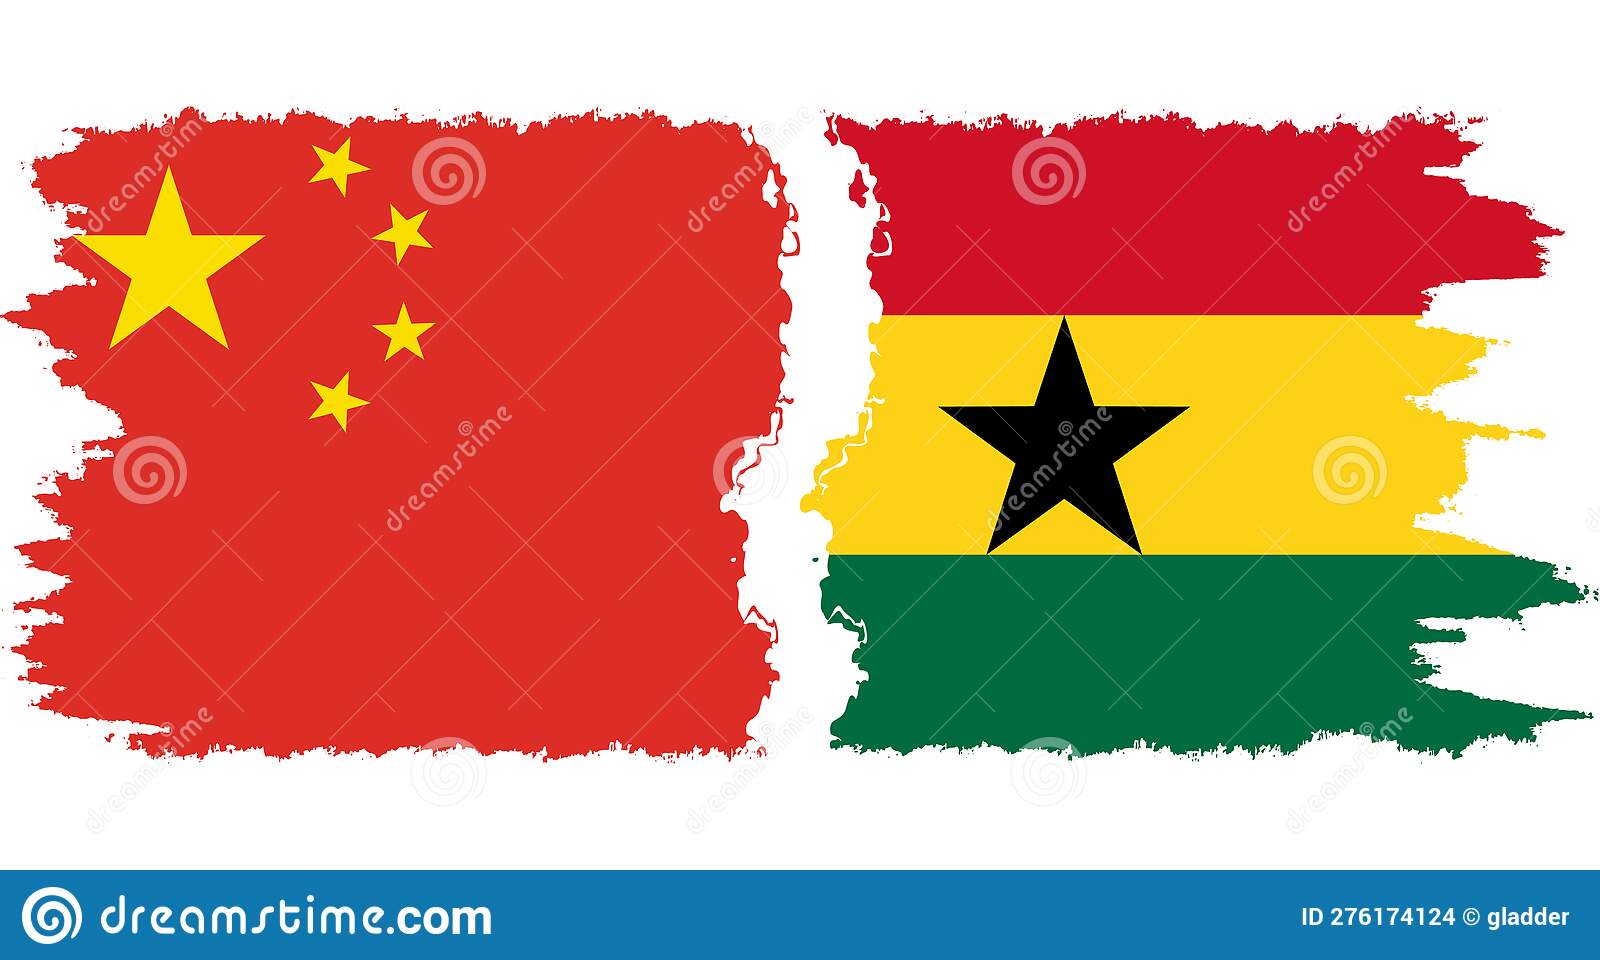 Reporting on Ghana-IMF Deal: China unhappy with Ghanaian Media